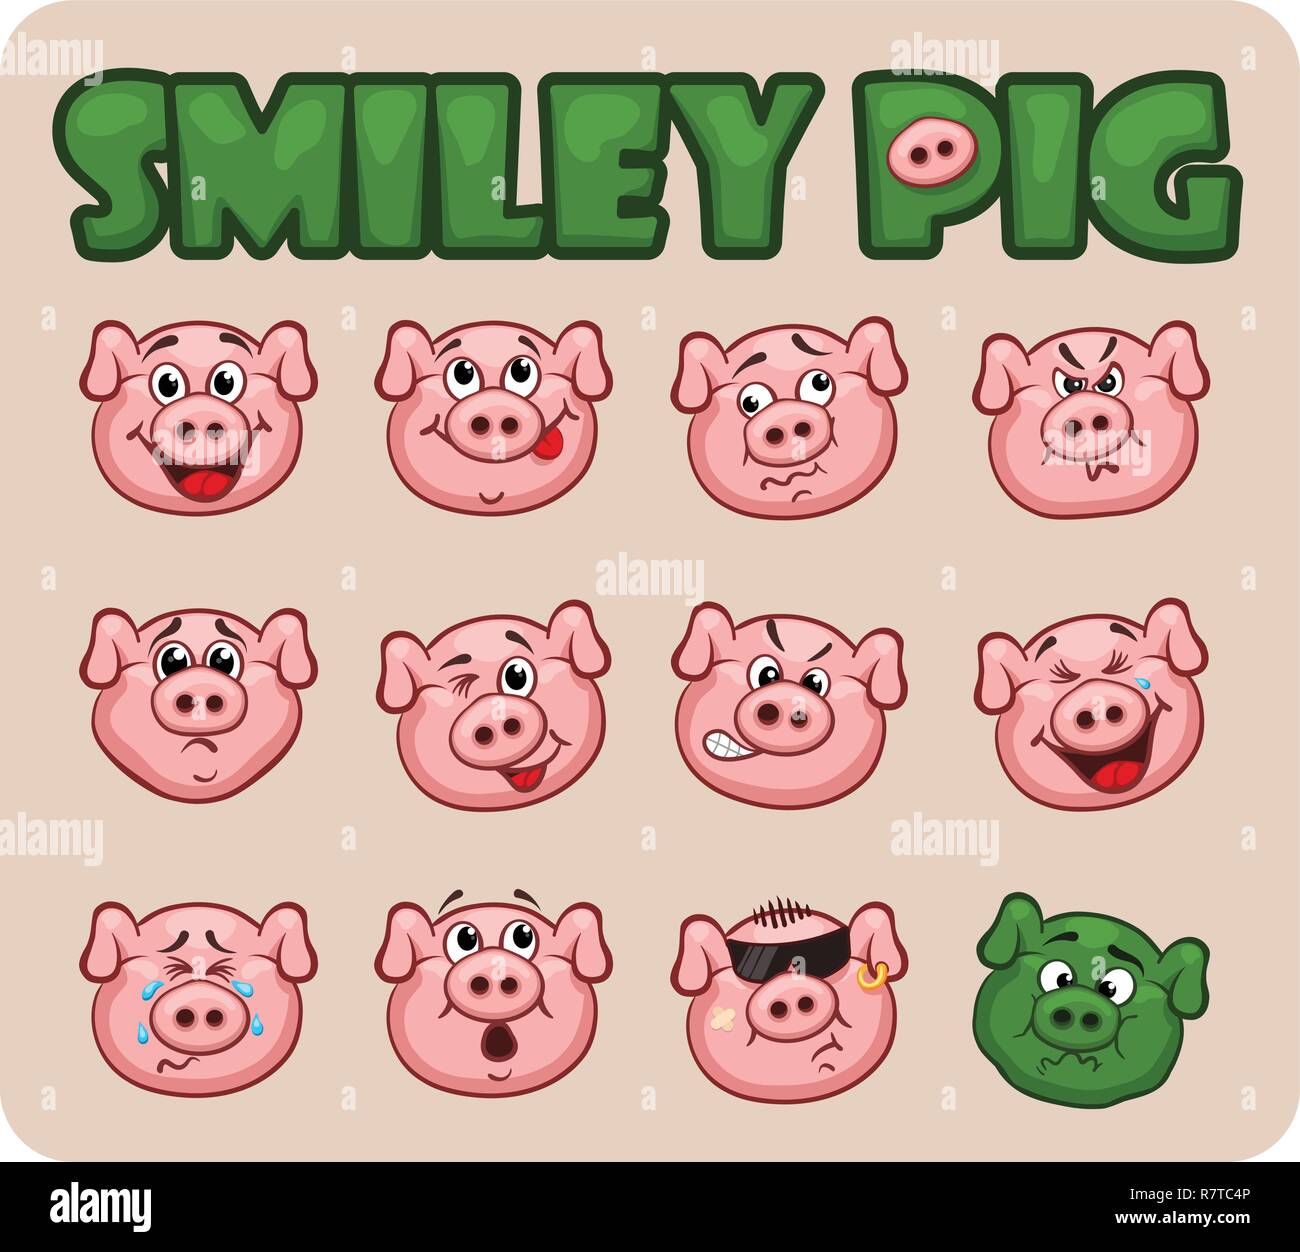 pig smiley faces set Stock Vector